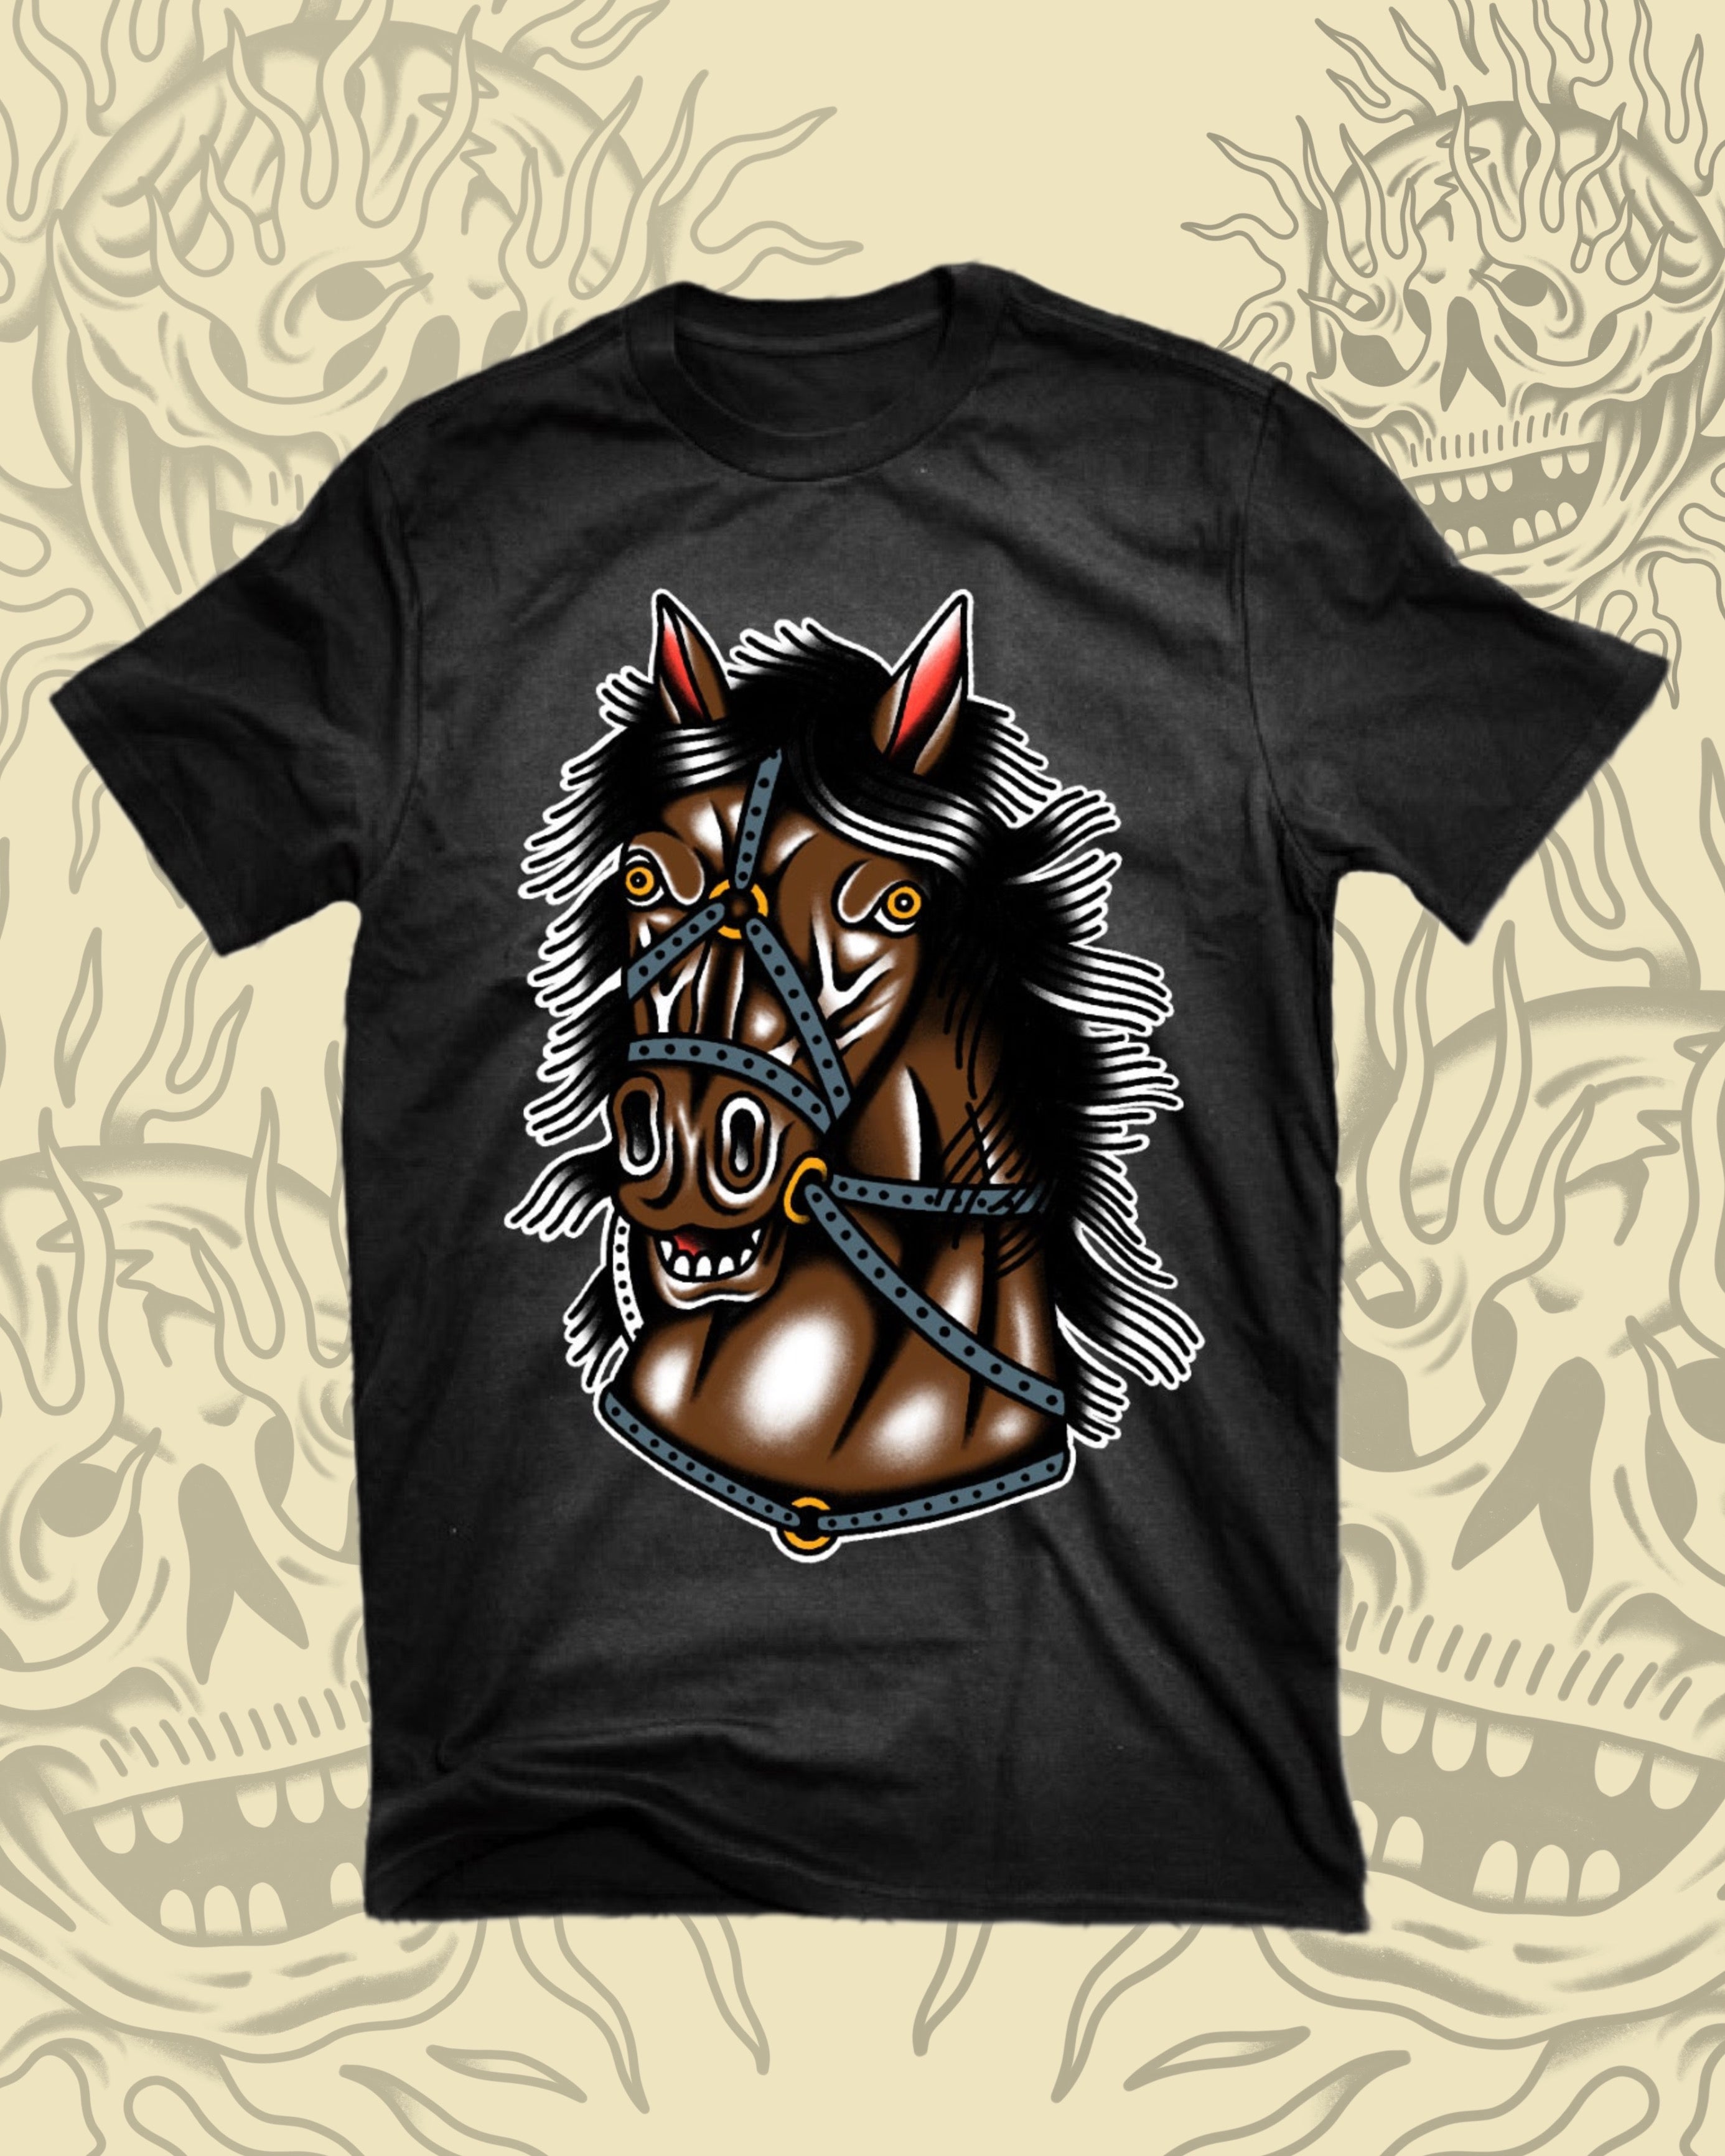 Deaths Chariot Tee